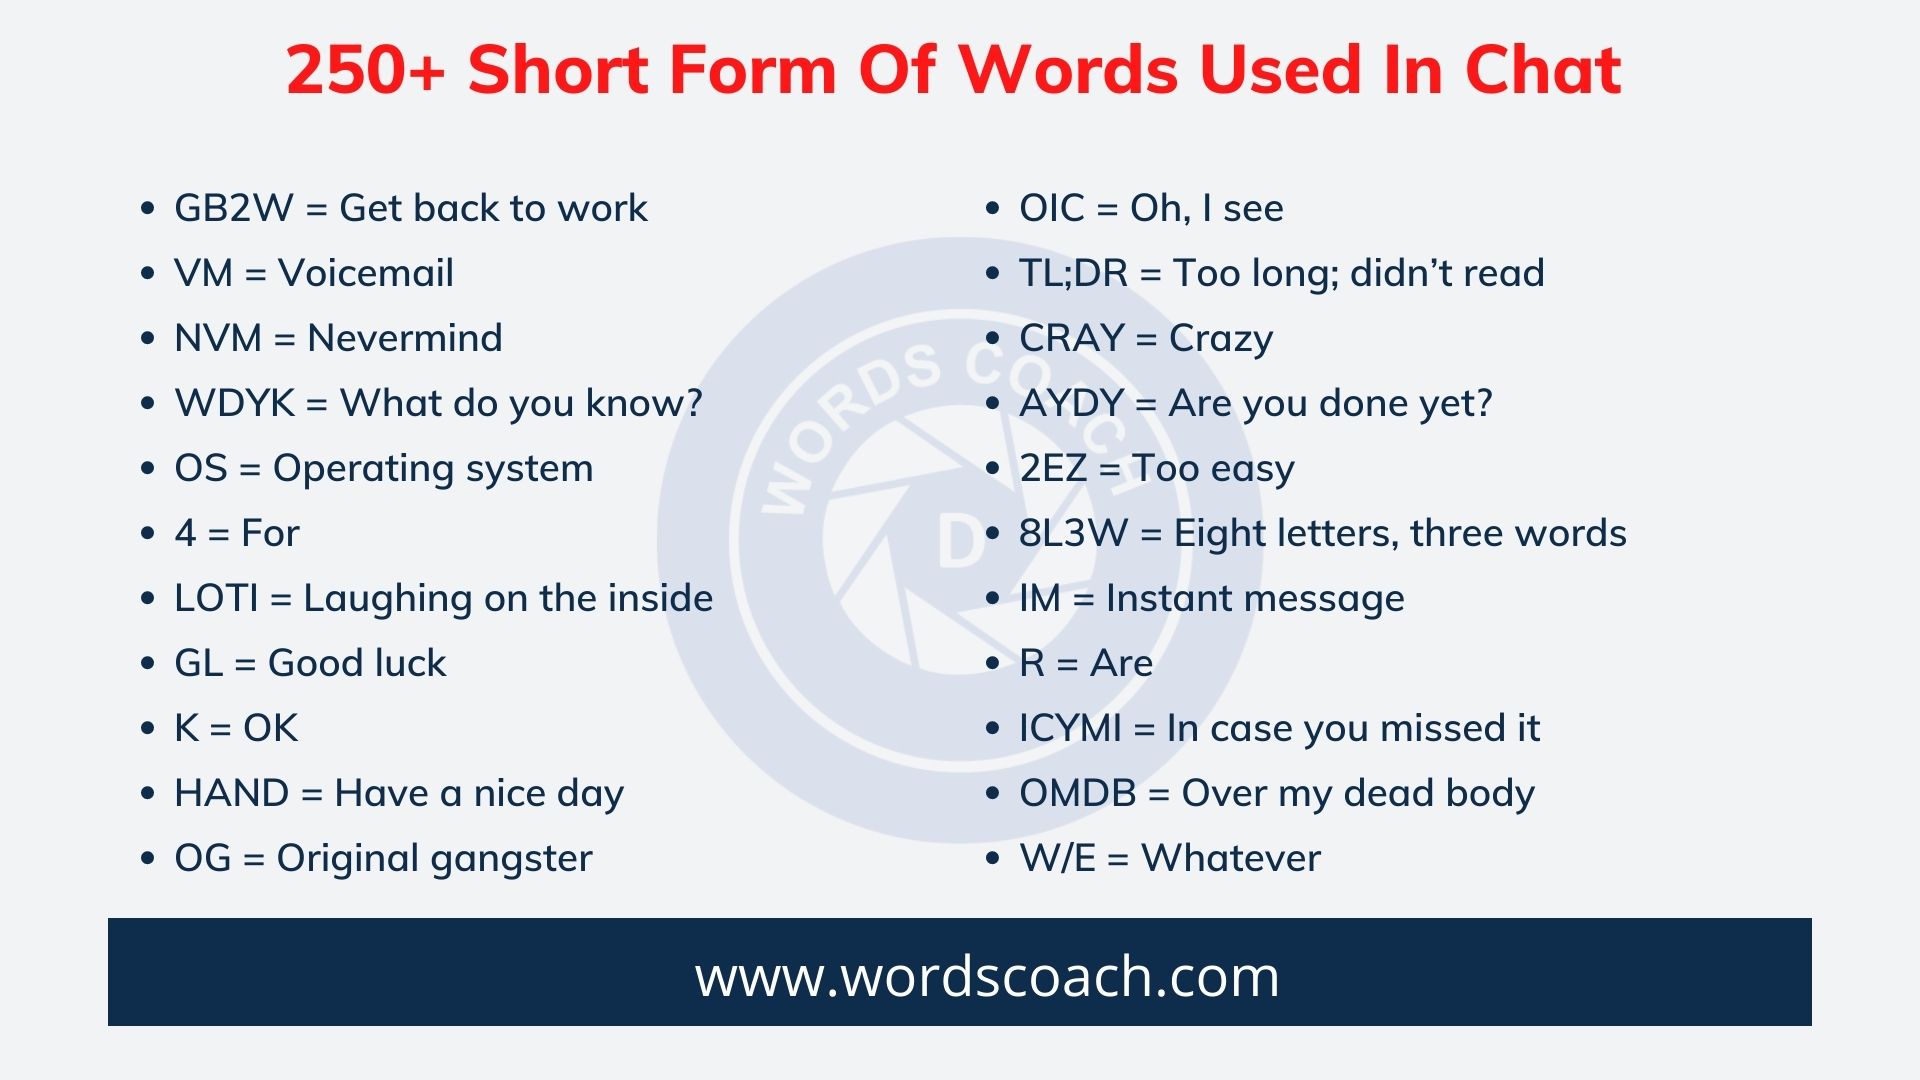 250+ Short Form Of Words Used In Chat